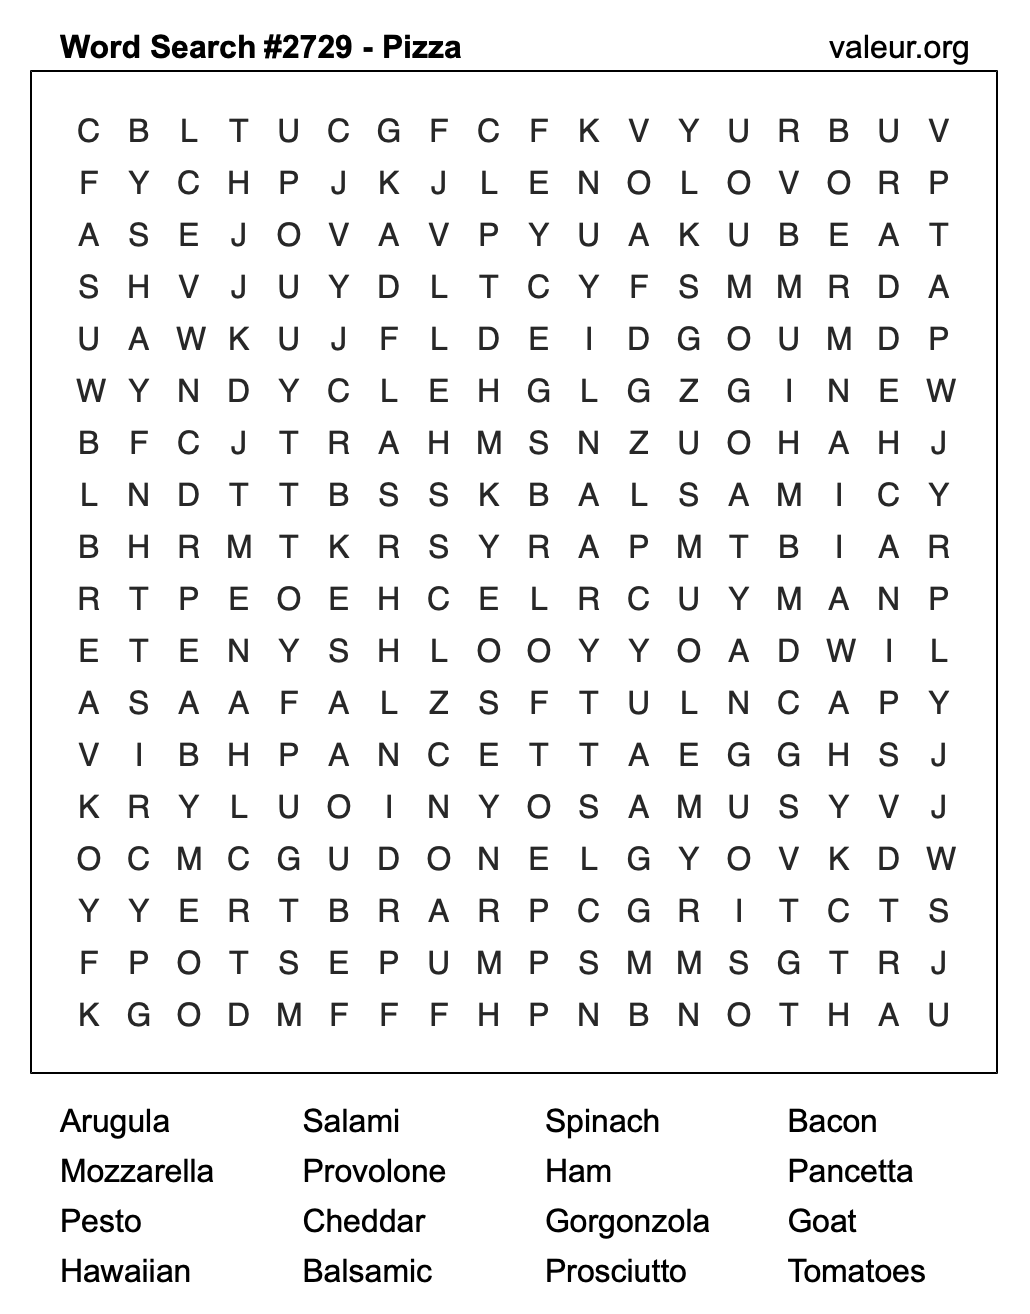 Pizza Word Search Puzzle #2729